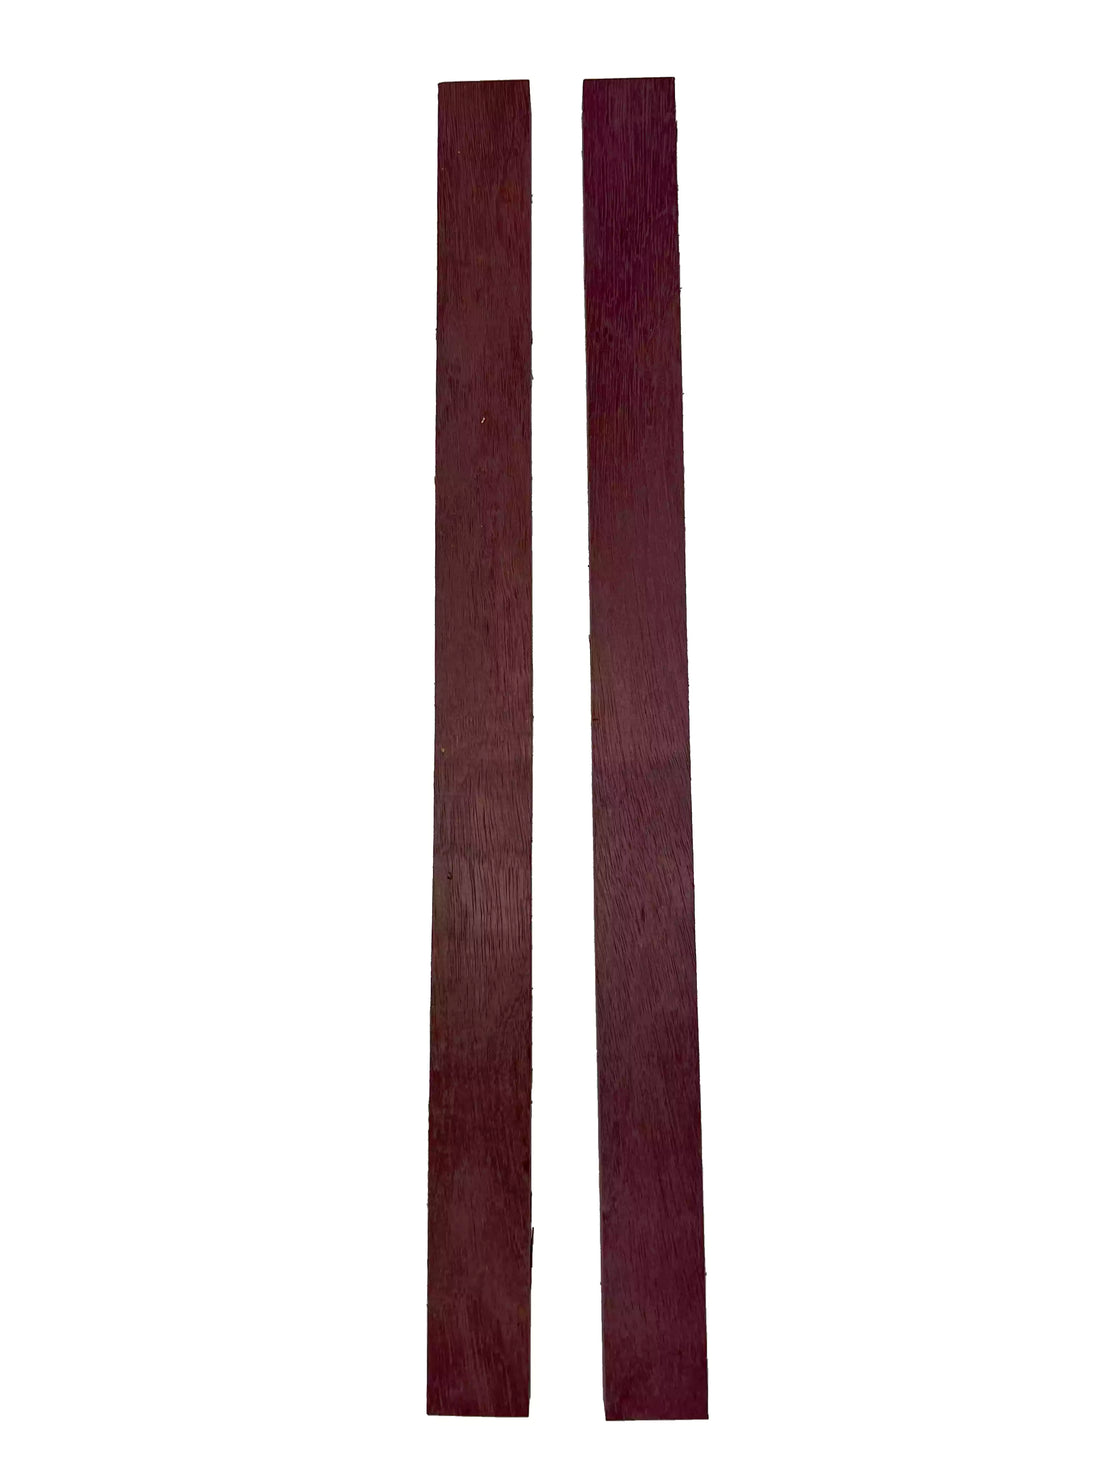 Pack of 2, Purpleheart Thin Stock Three-Dimensional Lumber Board Wood Blank 24&quot; x 1-3/4&quot; x 3/4&quot; 